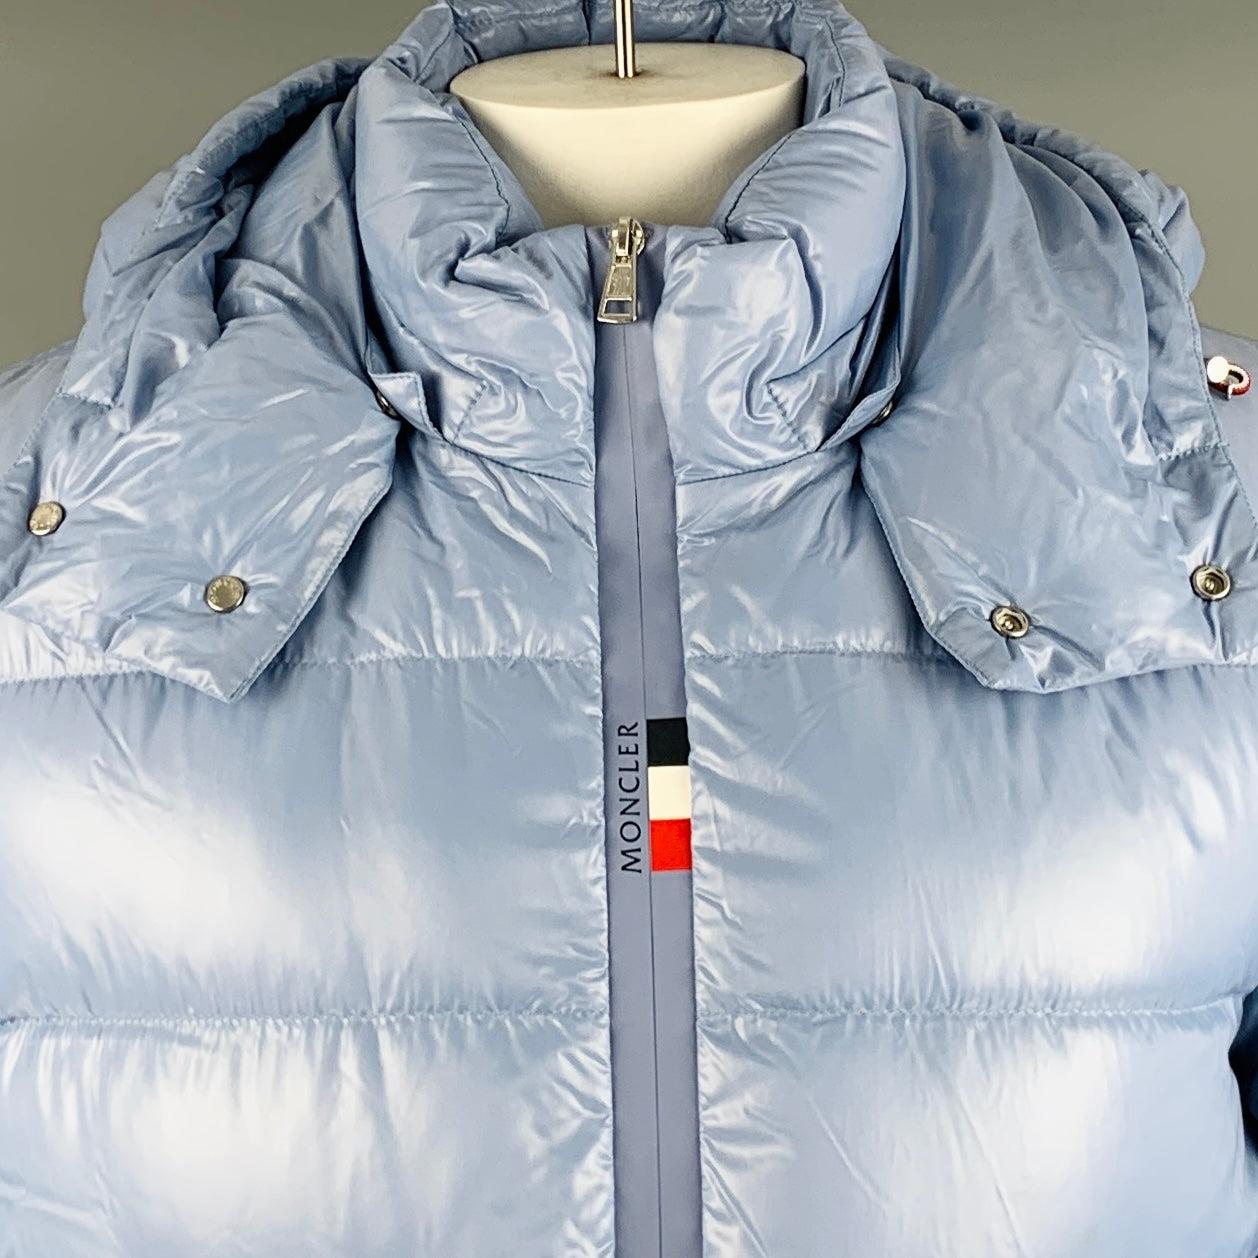 MONCLER jacket
in a light blue polyamide fabric featuring a quilted style, detachable hood, and zip up closure. Made in Romania.Very Good Pre-Owned Condition.
Minor mark. 

Marked:   G20911A00002 68950 

Measurements: 
 
Shoulder: 18 inches Chest: